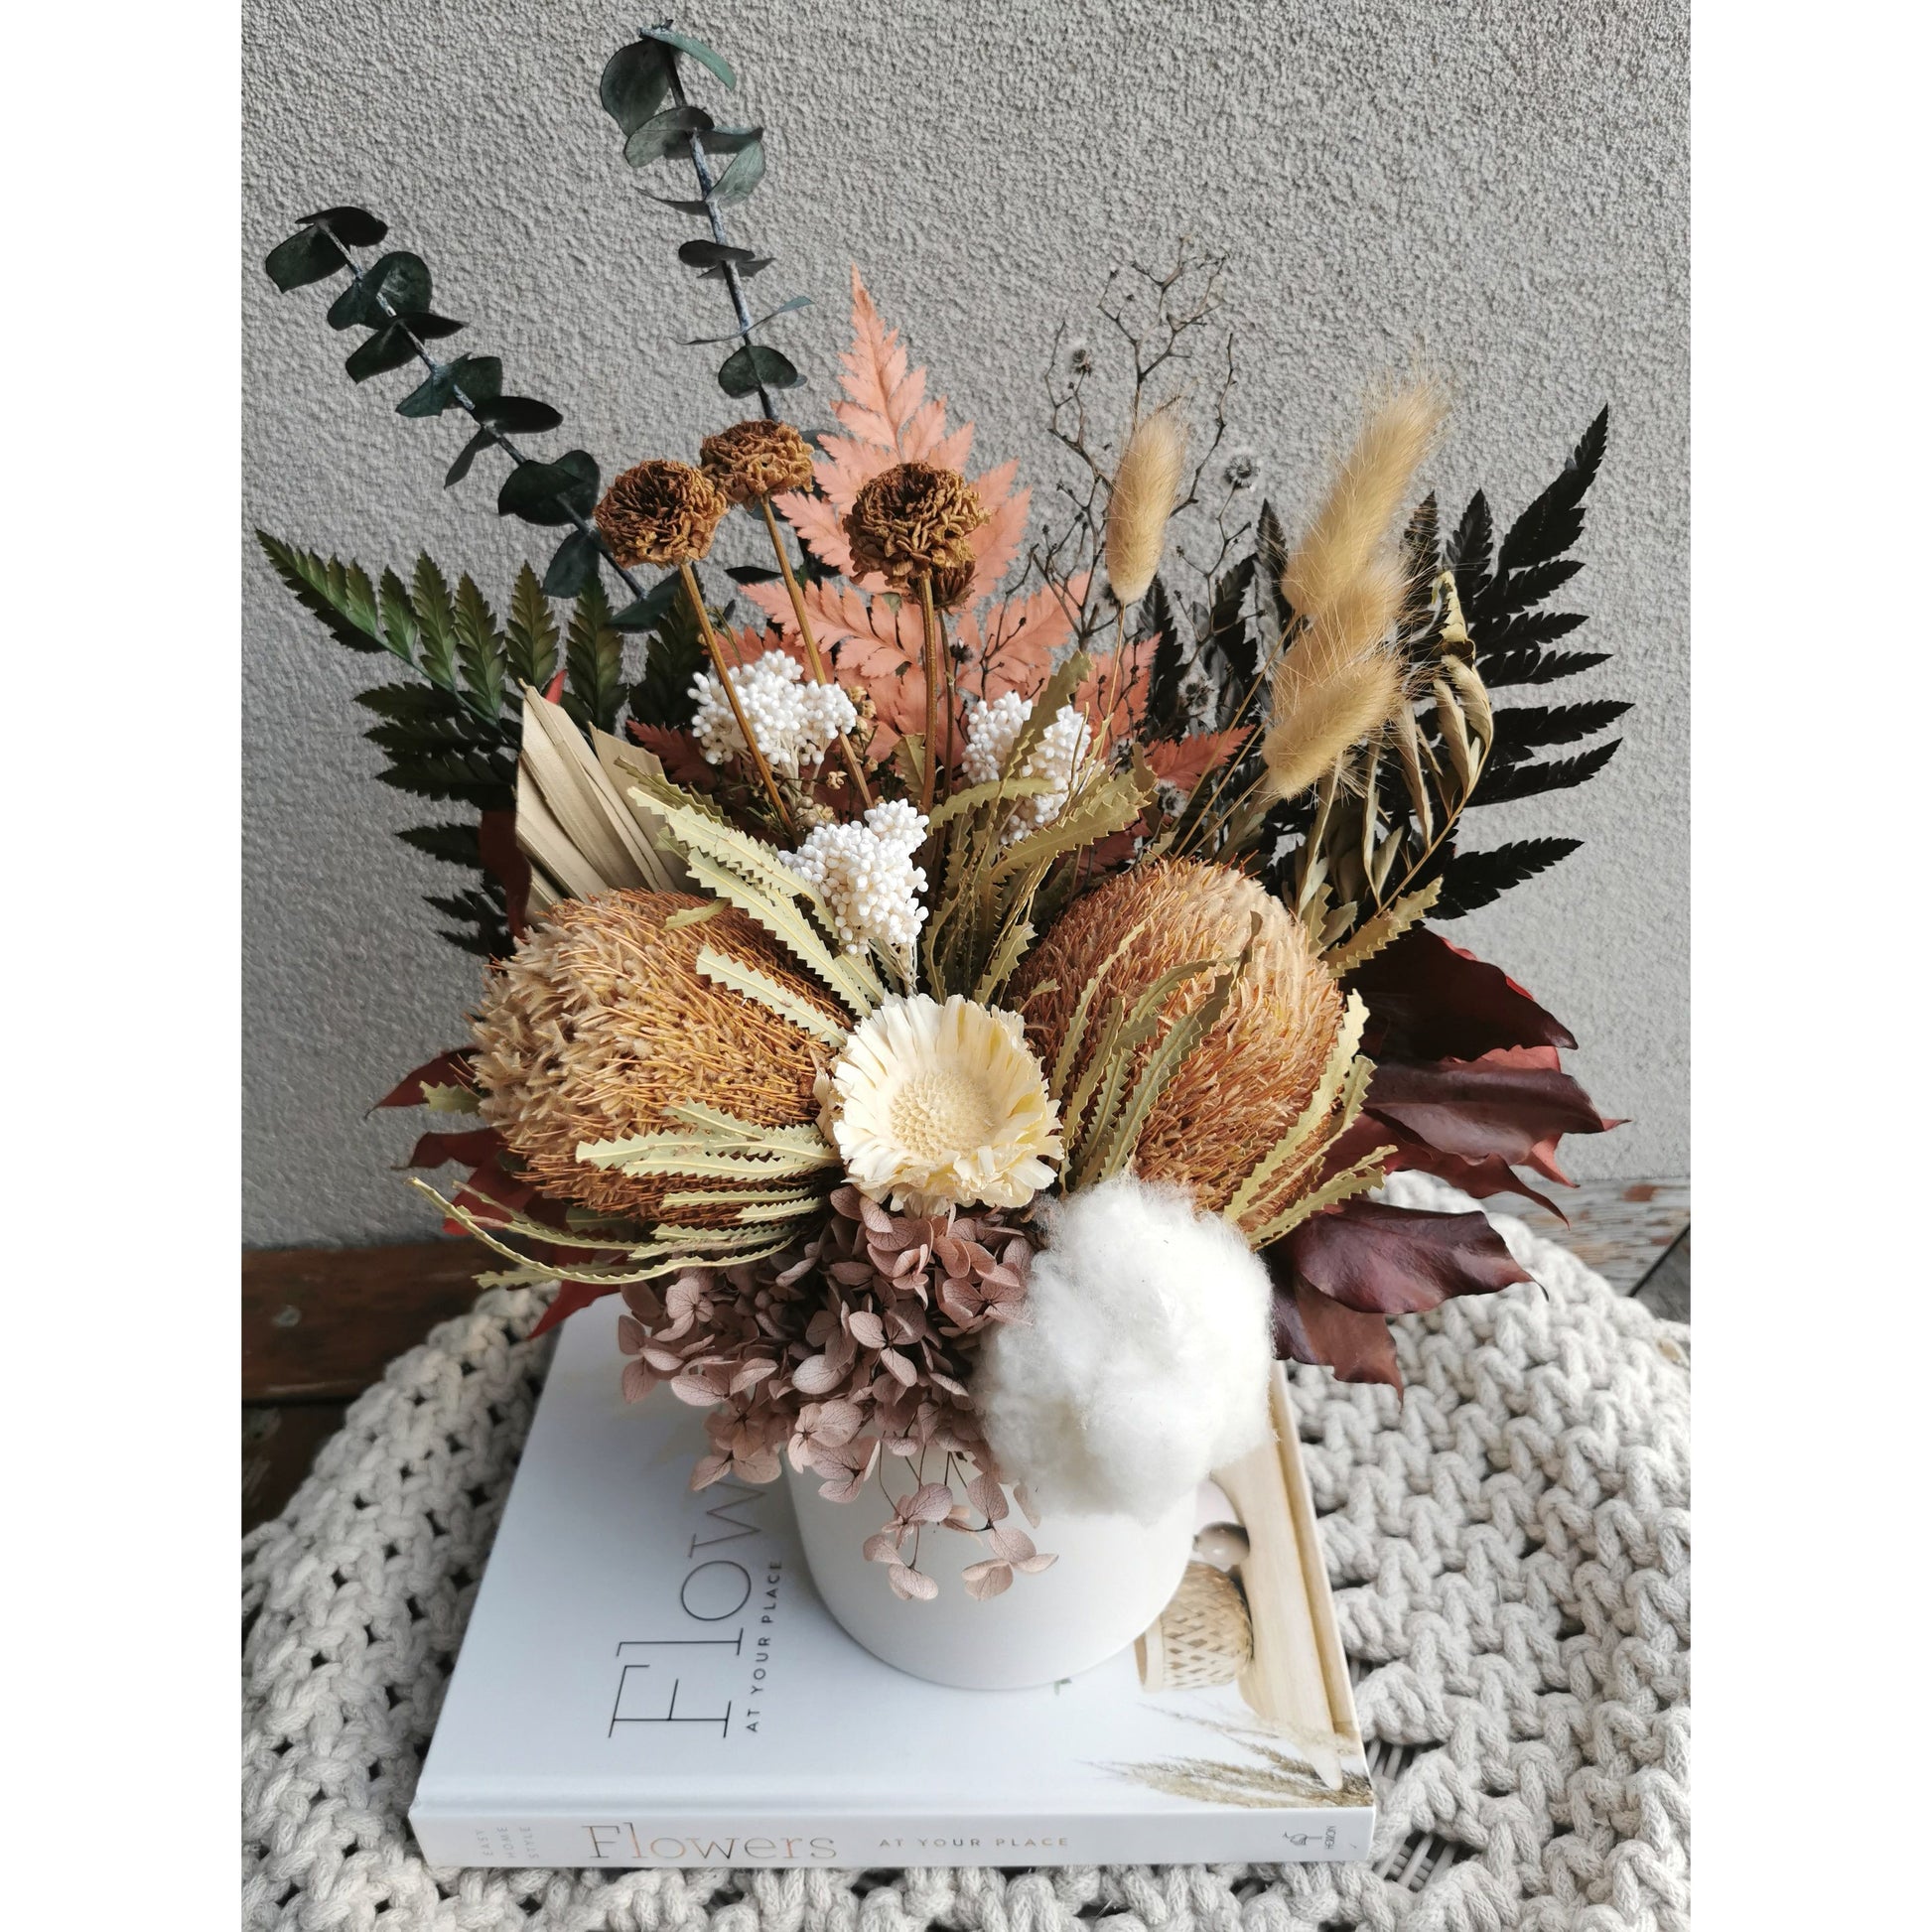 Dried & Preserved native flower arrangement in browns, greens, neutral colours and comes in a white pot including banksias, ferns & bunny tails to name a few. Photo shows arrangement sitting on a book against a blank wall